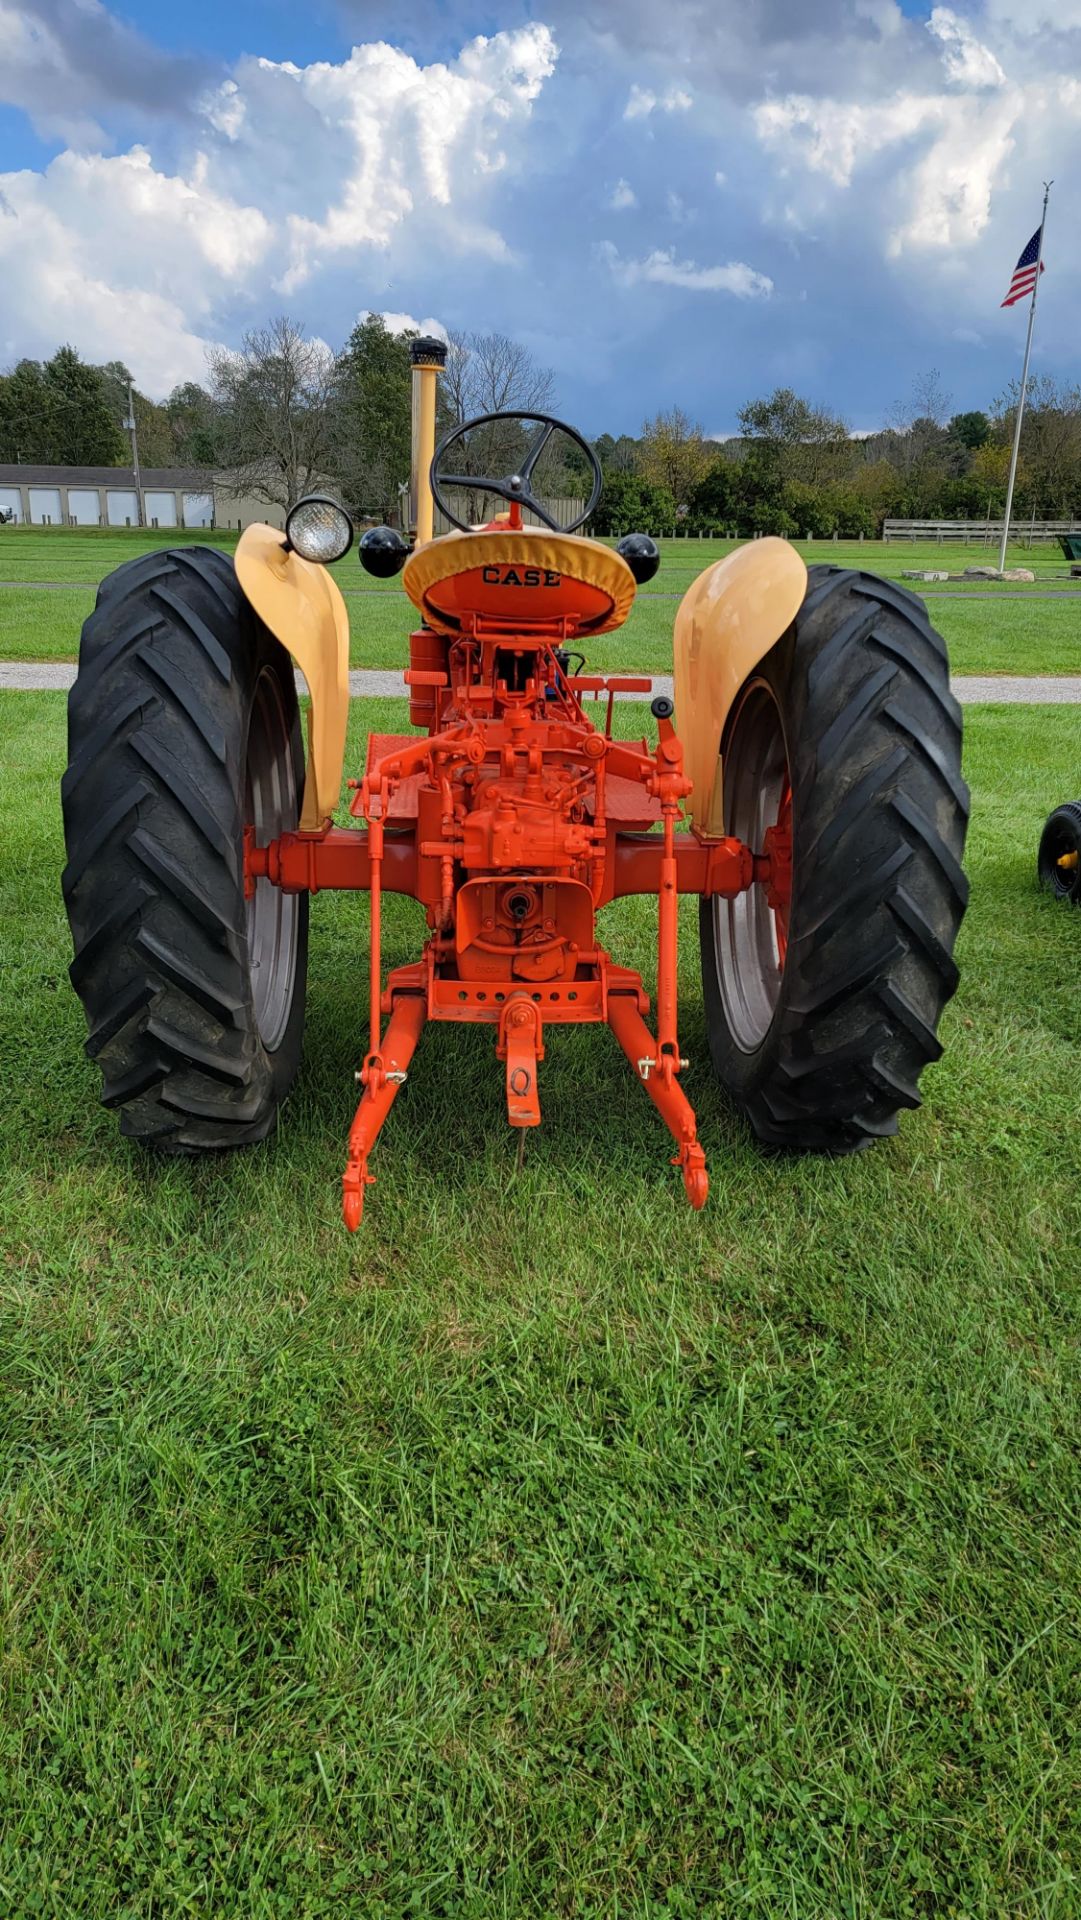 1956 Case 400 Row Crop Tractor, Model 411, s/n 8081224, Gasoline Engine, New in 1956, Restored - Image 24 of 32